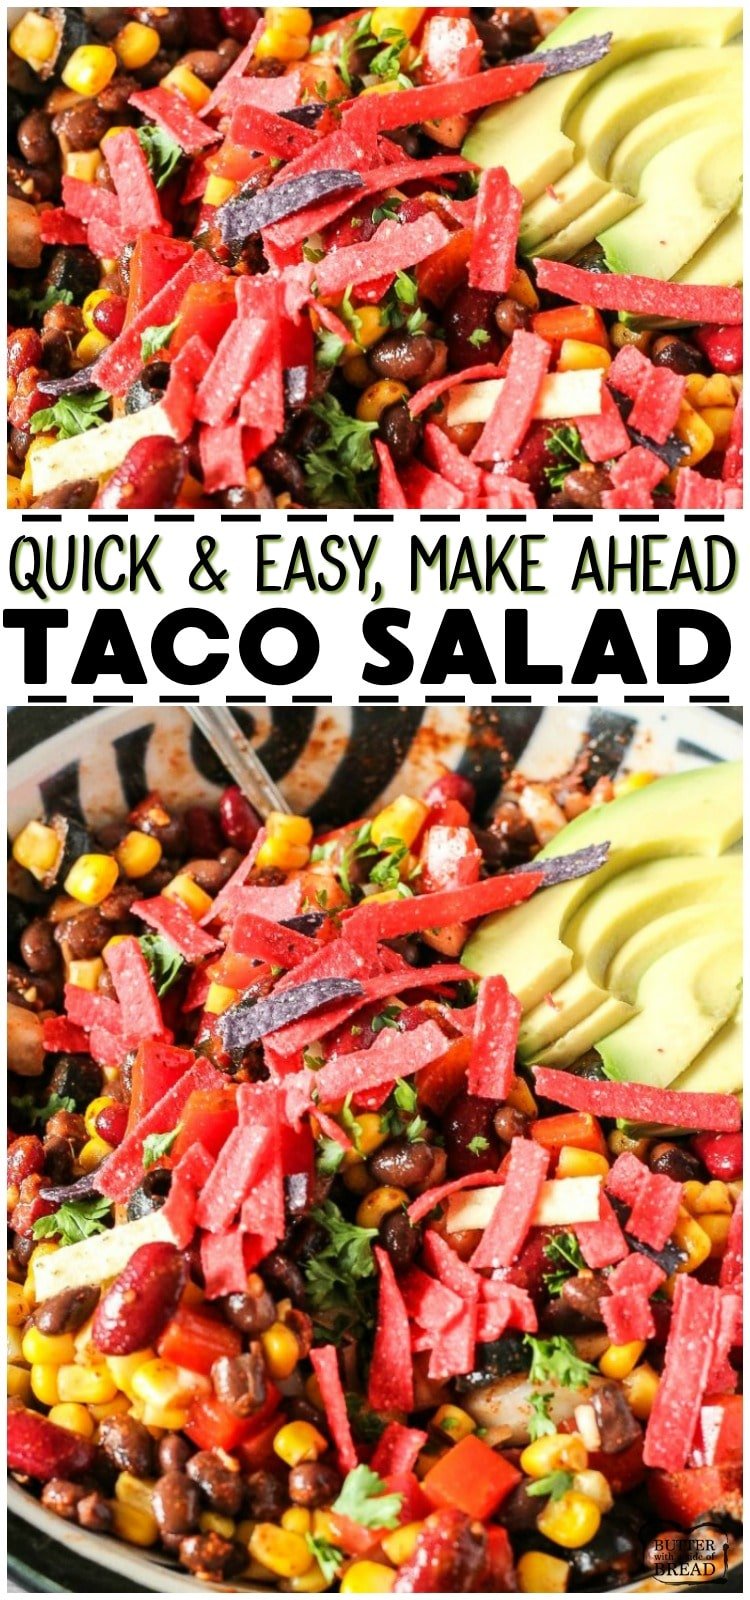 Easy Taco Salad Recipe loaded with beans, corn, peppers, onions, tomatoes and perfectly seasoned! Simple vegetarian taco salad to whip up for an easy dinner or for a potluck! #tacosalad #salad #potluck #blackbean #vegetarian #meatless #dinner #recipe from BUTTER WITH A SIDE OF BREAD